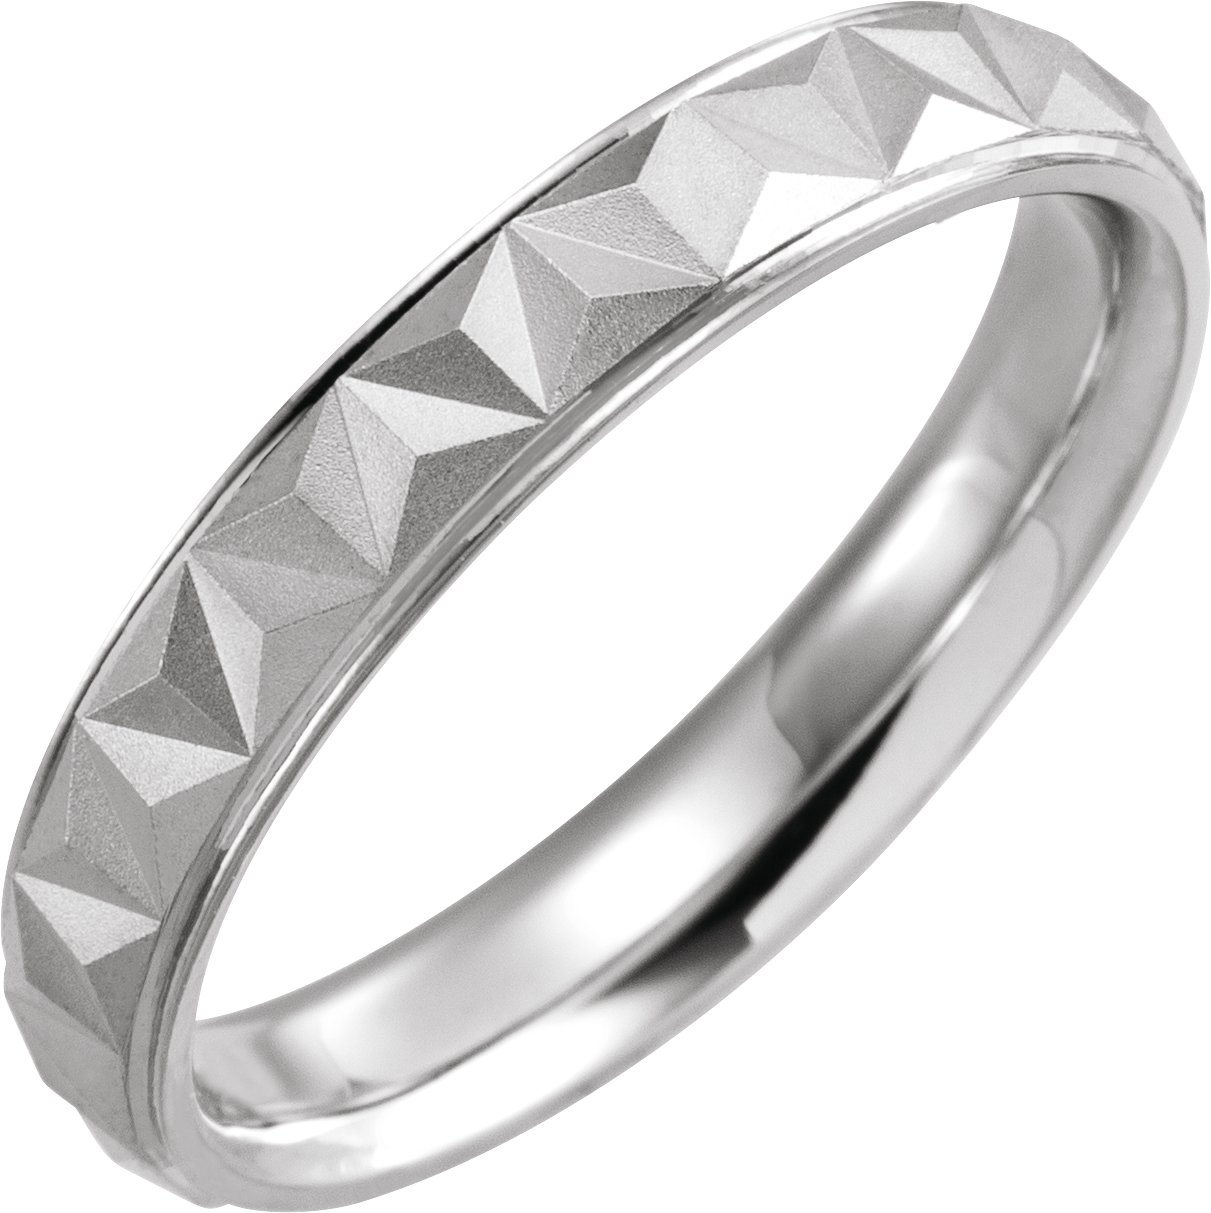 Sterling Silver 4 mm Geometric Band with Matte/Polished Finish Size 20